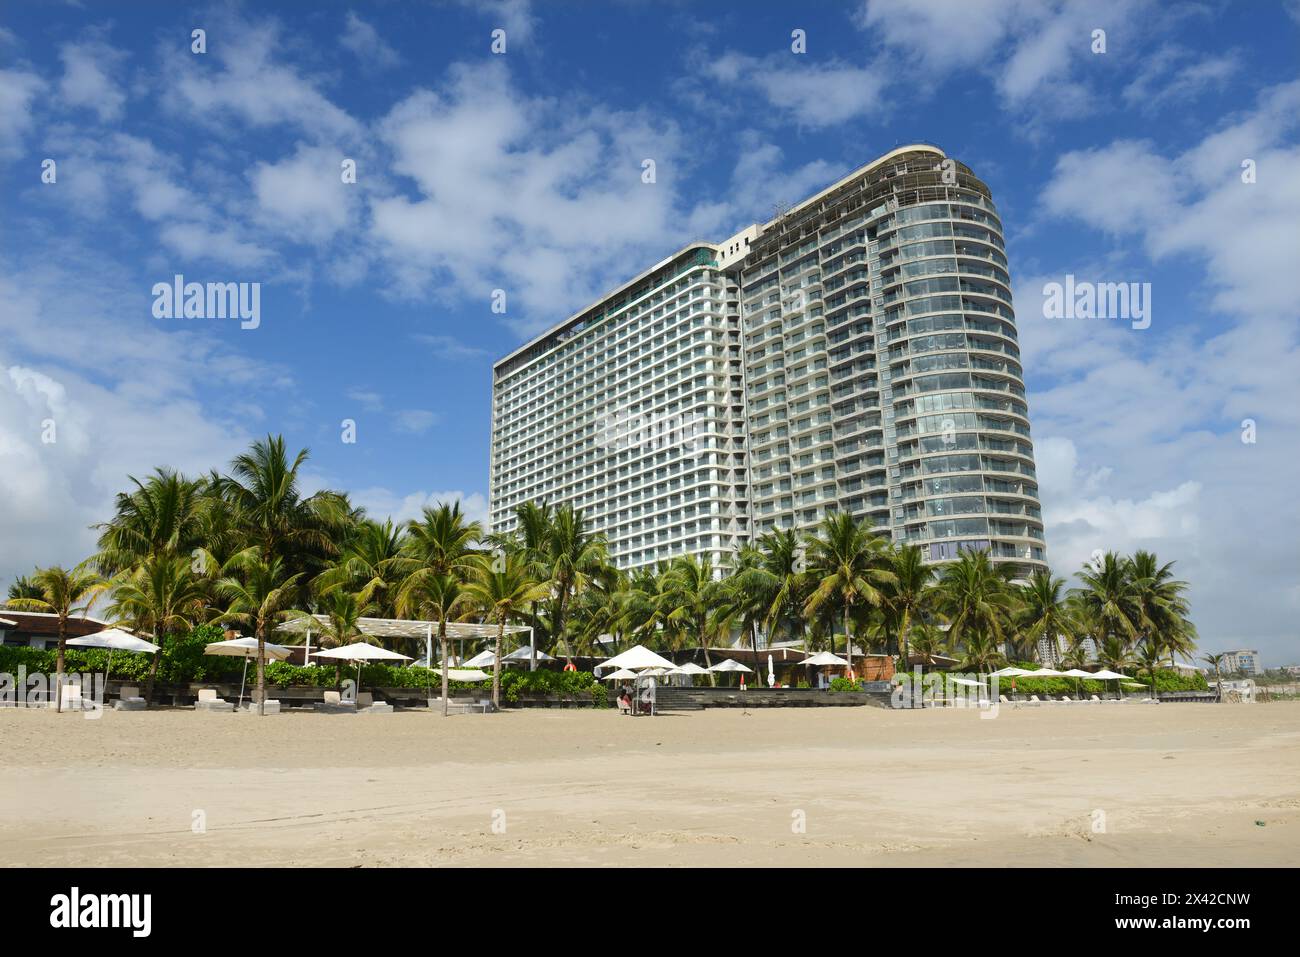 A new giant hotel under construction along the beautiful long white sand beach along the changing waterfront skyline in Da Nang, Vietnam. Stock Photo